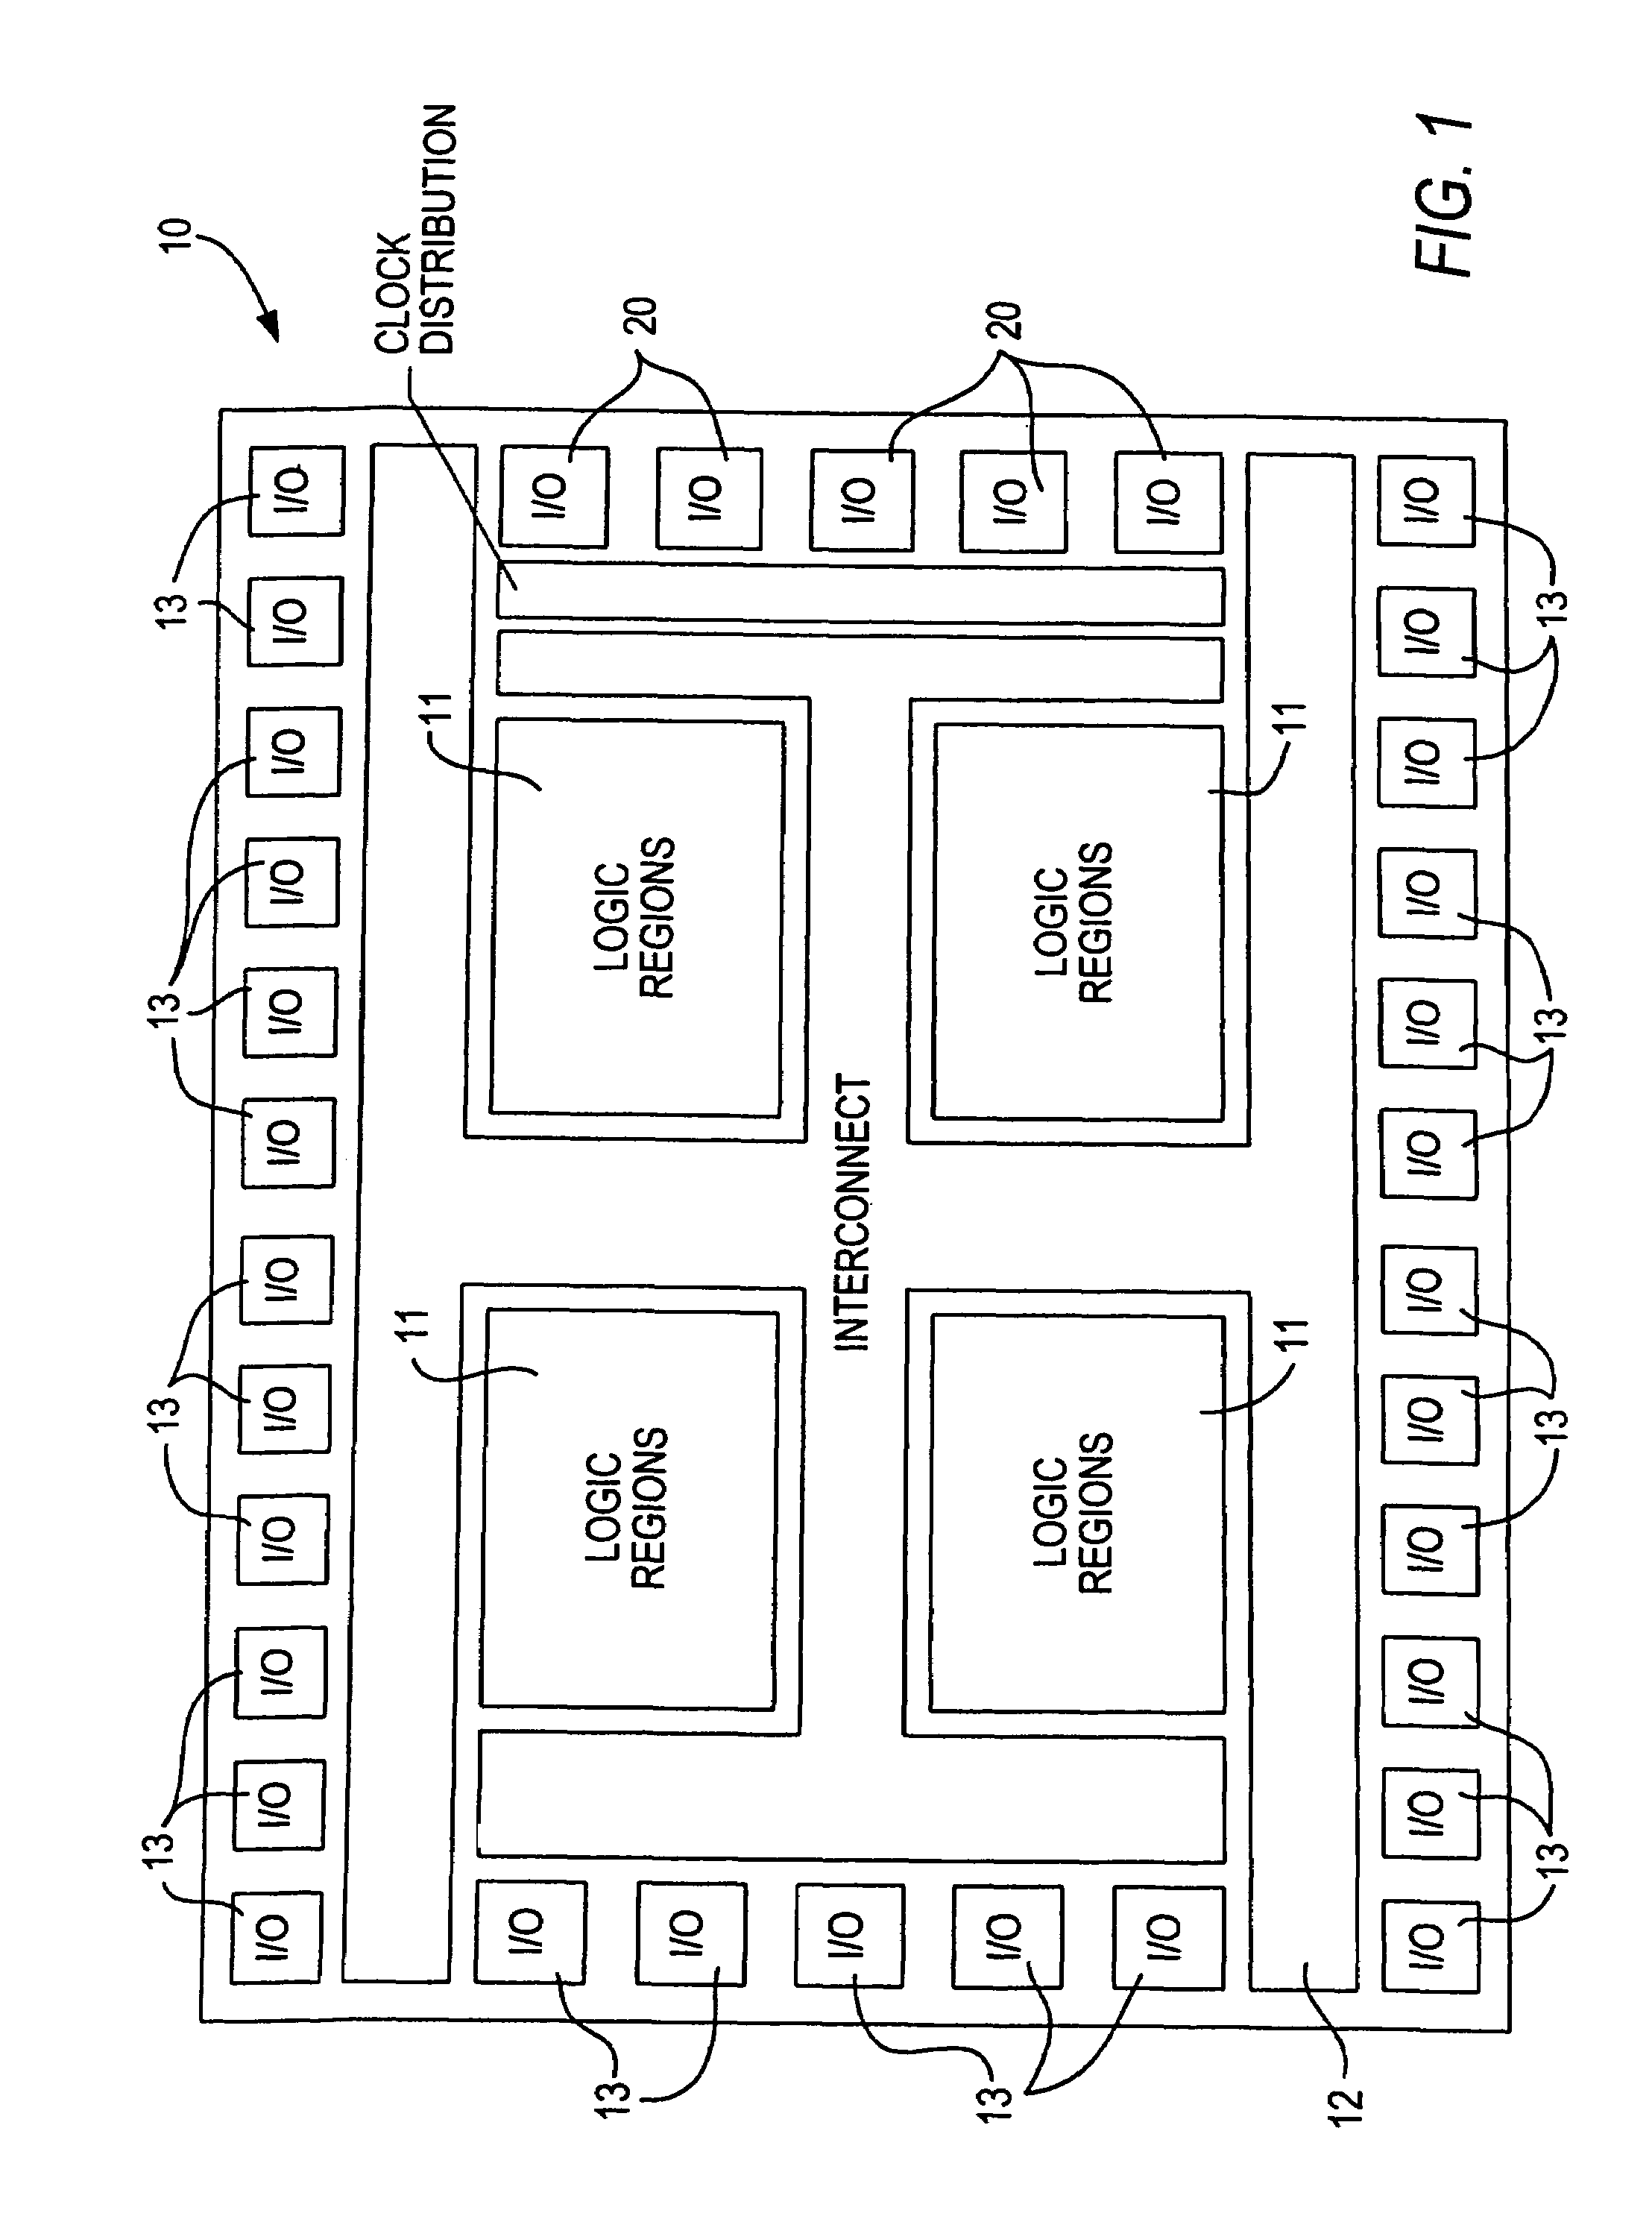 Multiple data rates in integrated circuit device serial interface